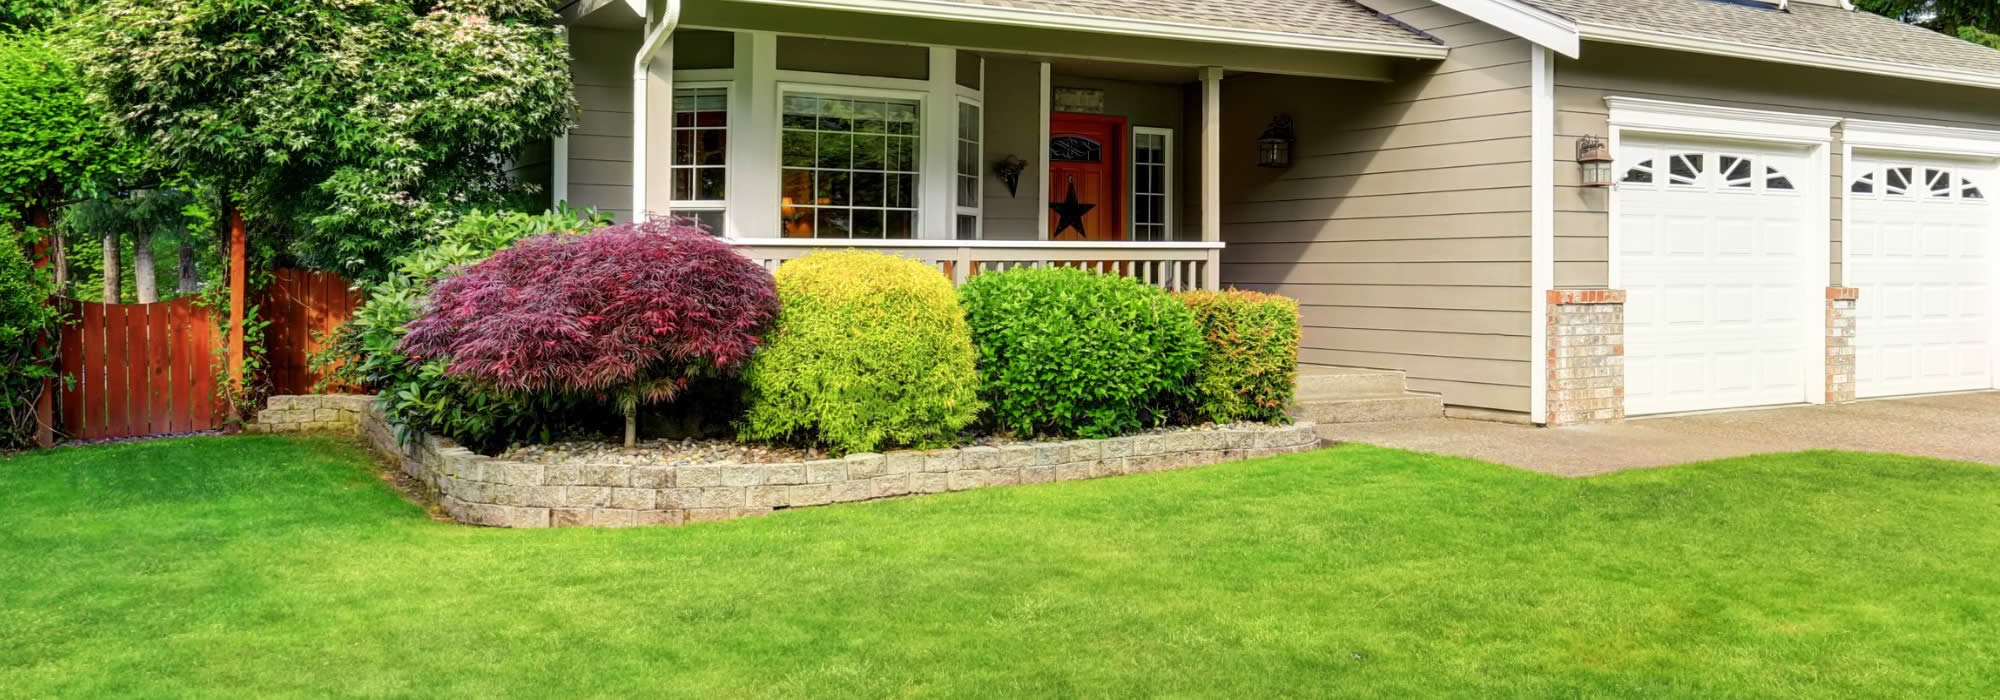 Landscaping Services in Shorewood Hills